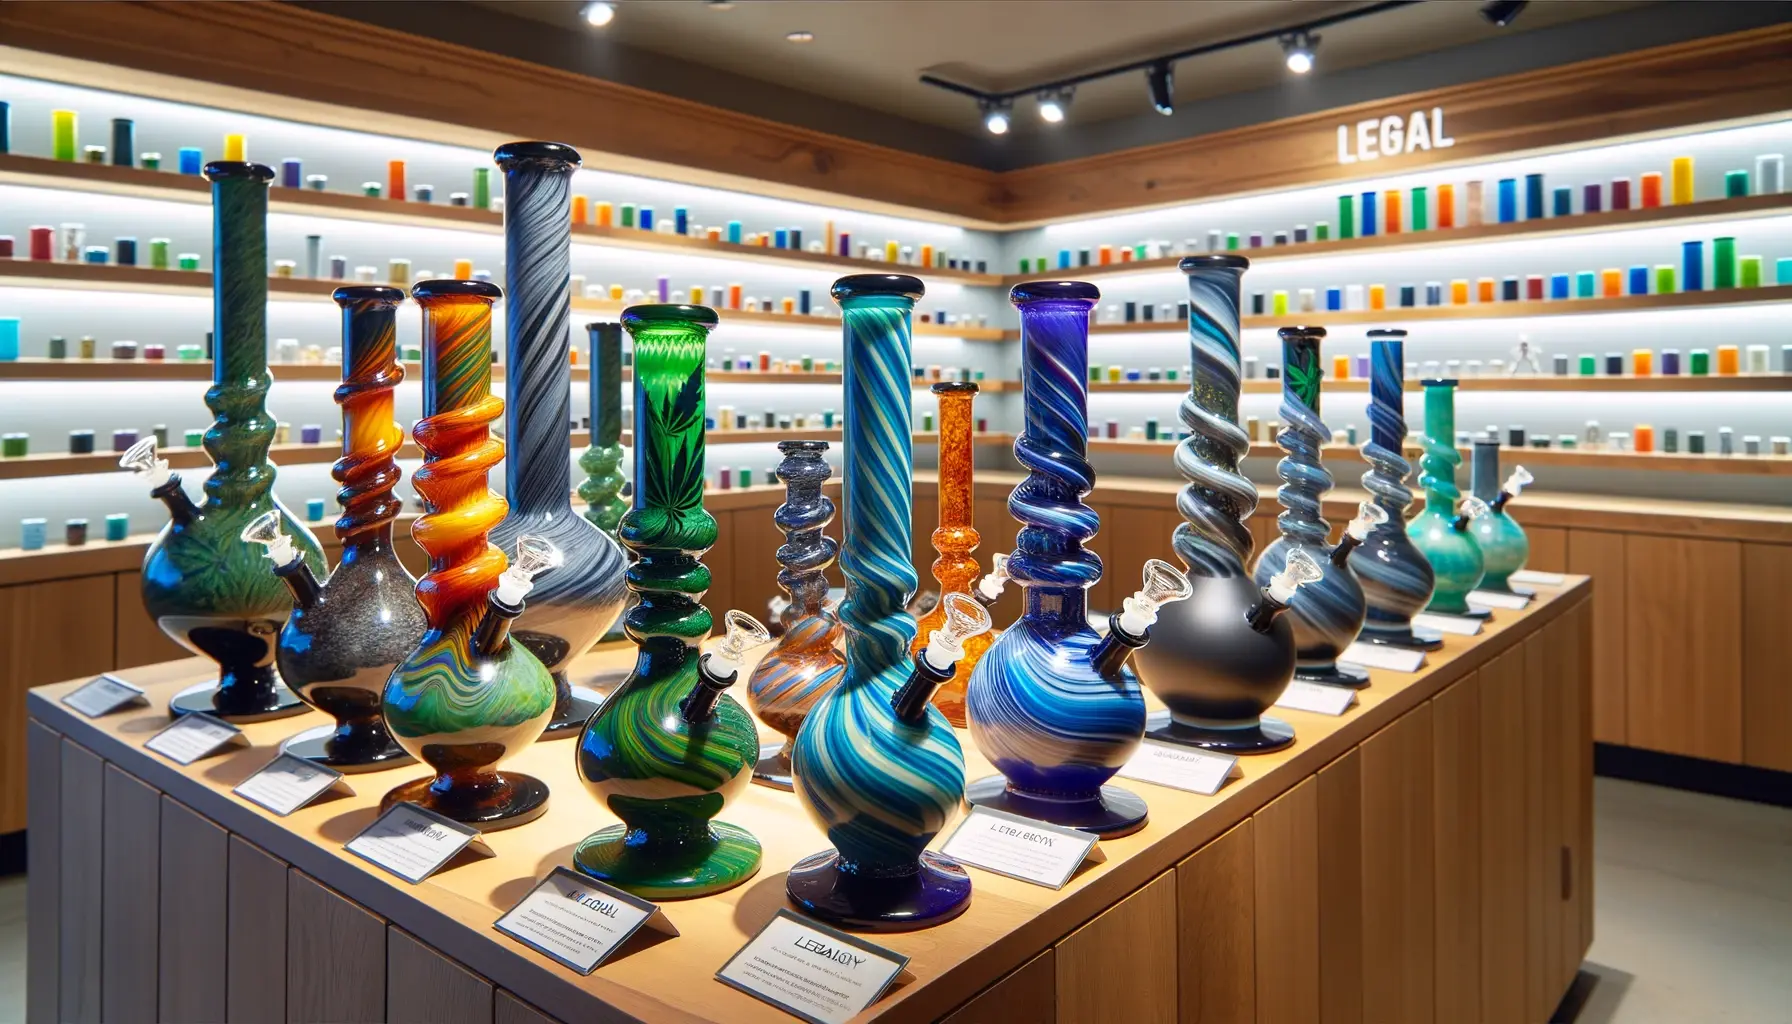 Selection of high-quality, artisanal glass bongs displayed on wooden shelves inside a modern, well-lit, legal dispensary. The bongs vary in size and are intricately designed with swirls of vibrant colors like deep blues, emerald greens, and fiery oranges. The setting includes labels indicating the craftsmanship and legality, with a clear focus on the artistry and quality of the glasswork.